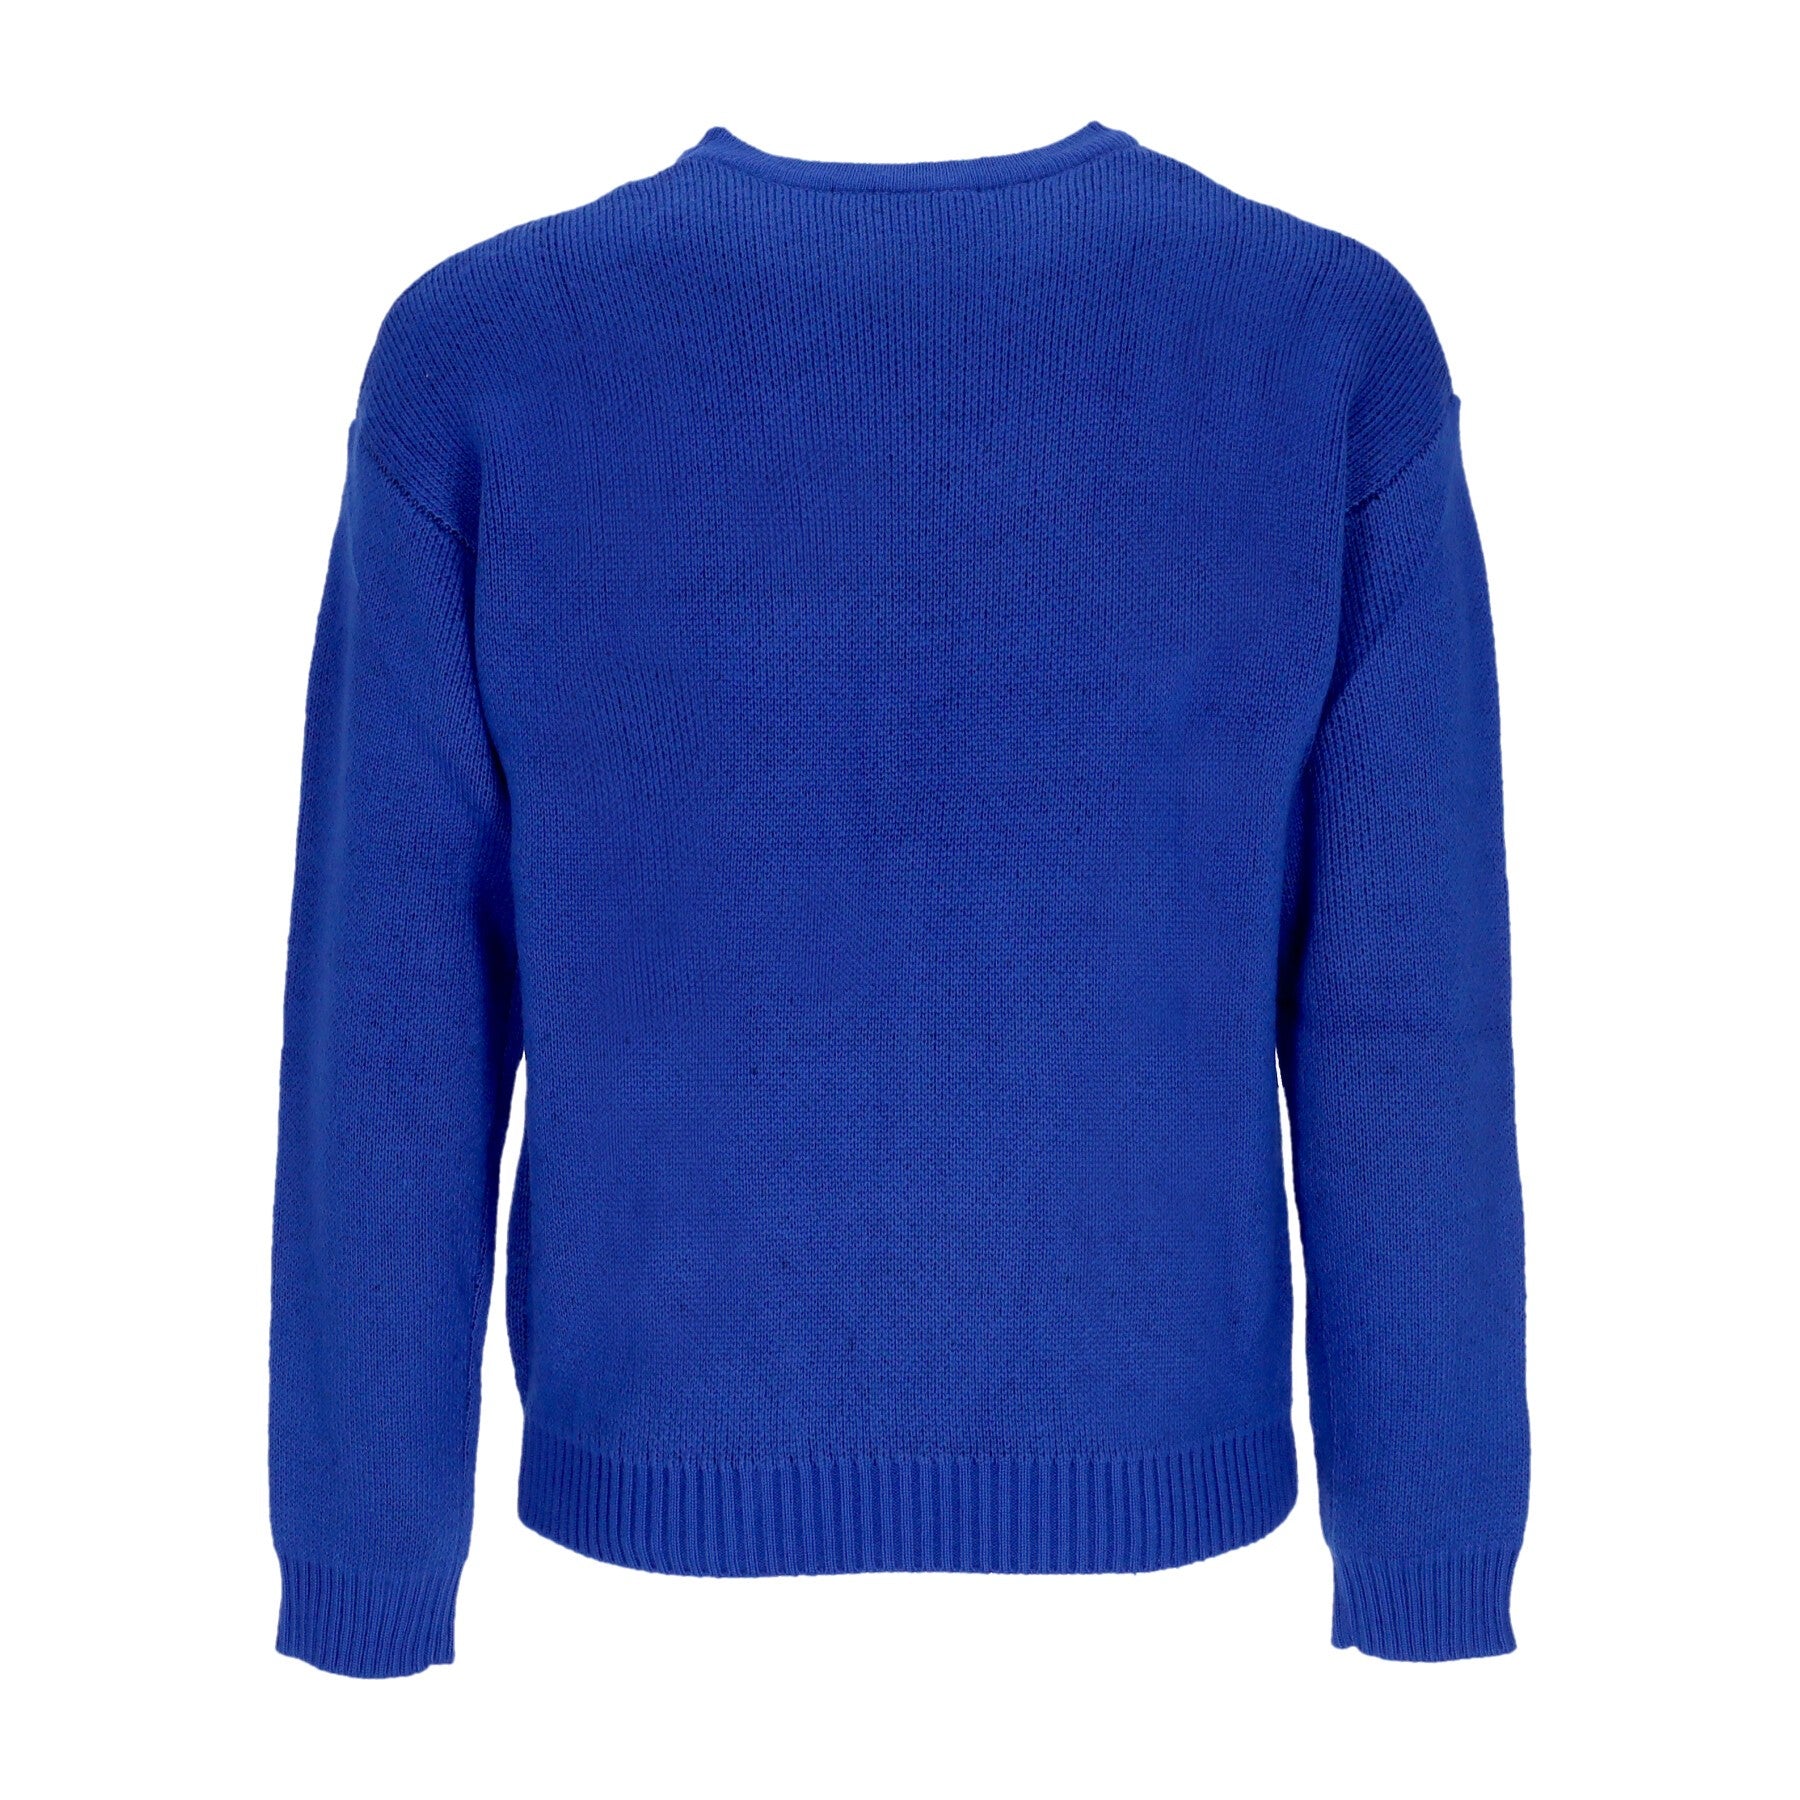 Usualism Sweater Men's Sweater Royal Blue